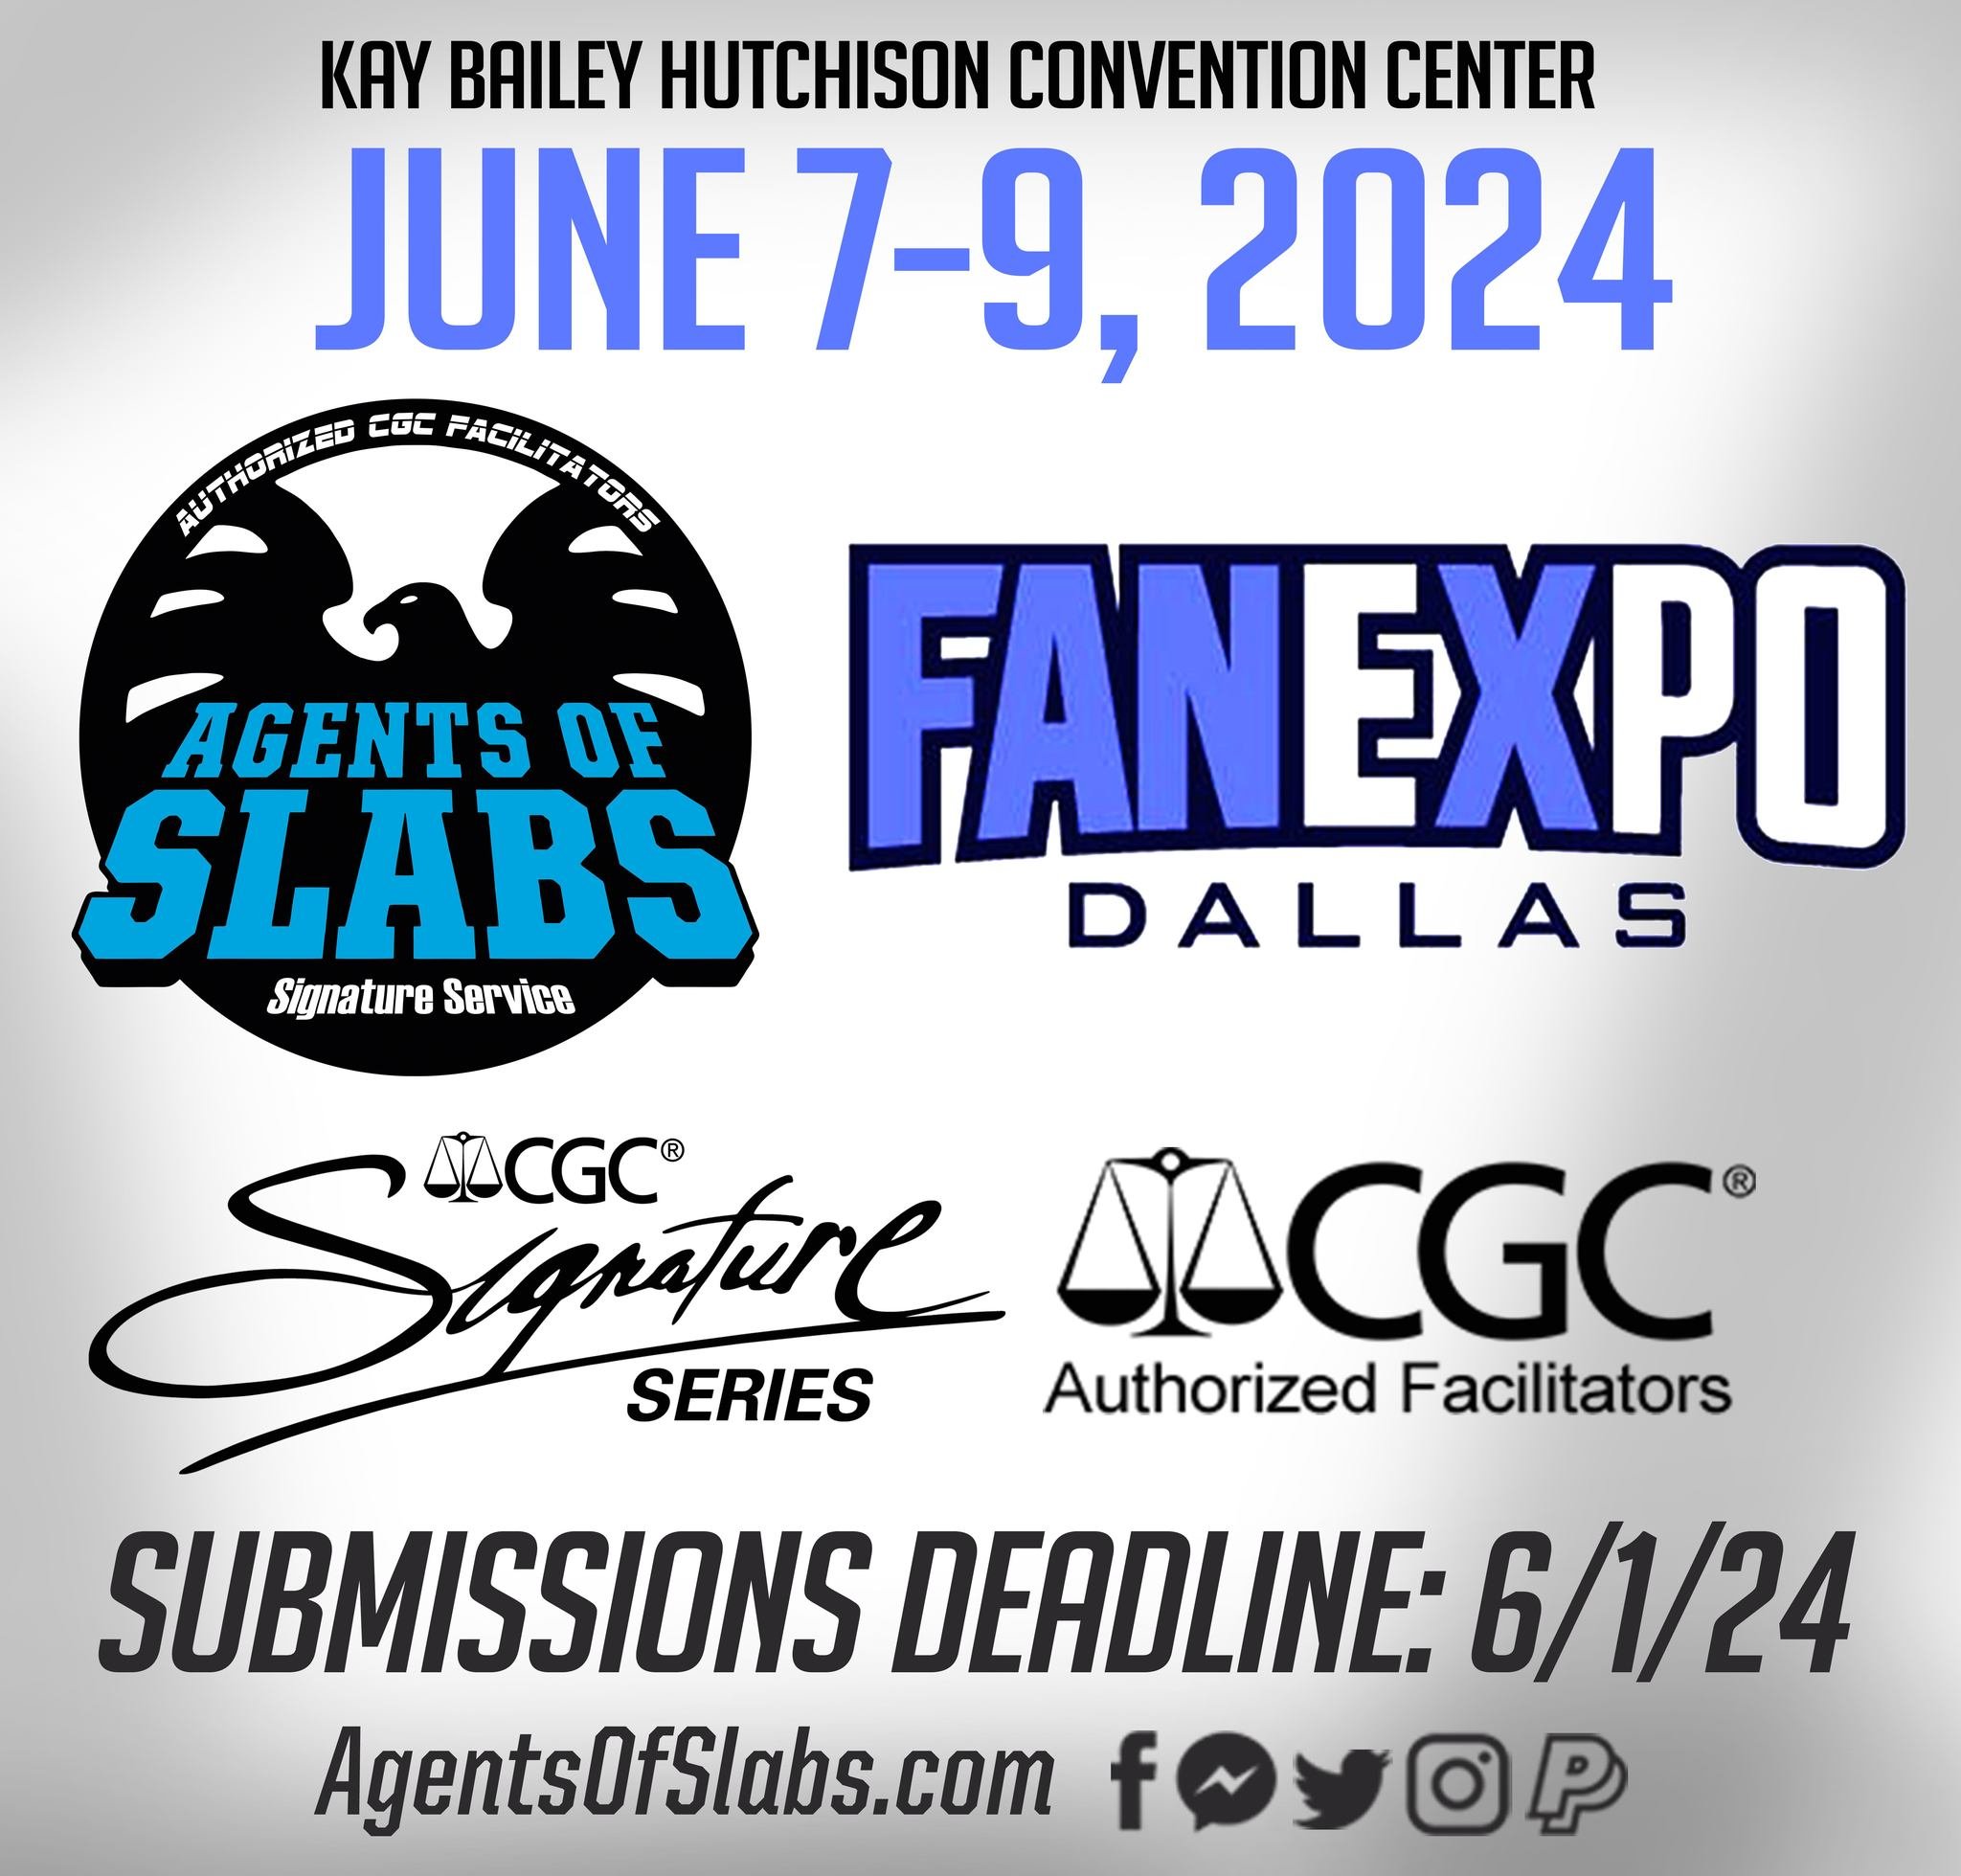 This is the first of 3 big announcements coming your way today!
The Agents of Slabs team is heading to the Lone Star state! We are actively taking in mail-in submissions for FanExpo Dallas! Deadline for mail-in submissions is 6 /1/24! This show alway